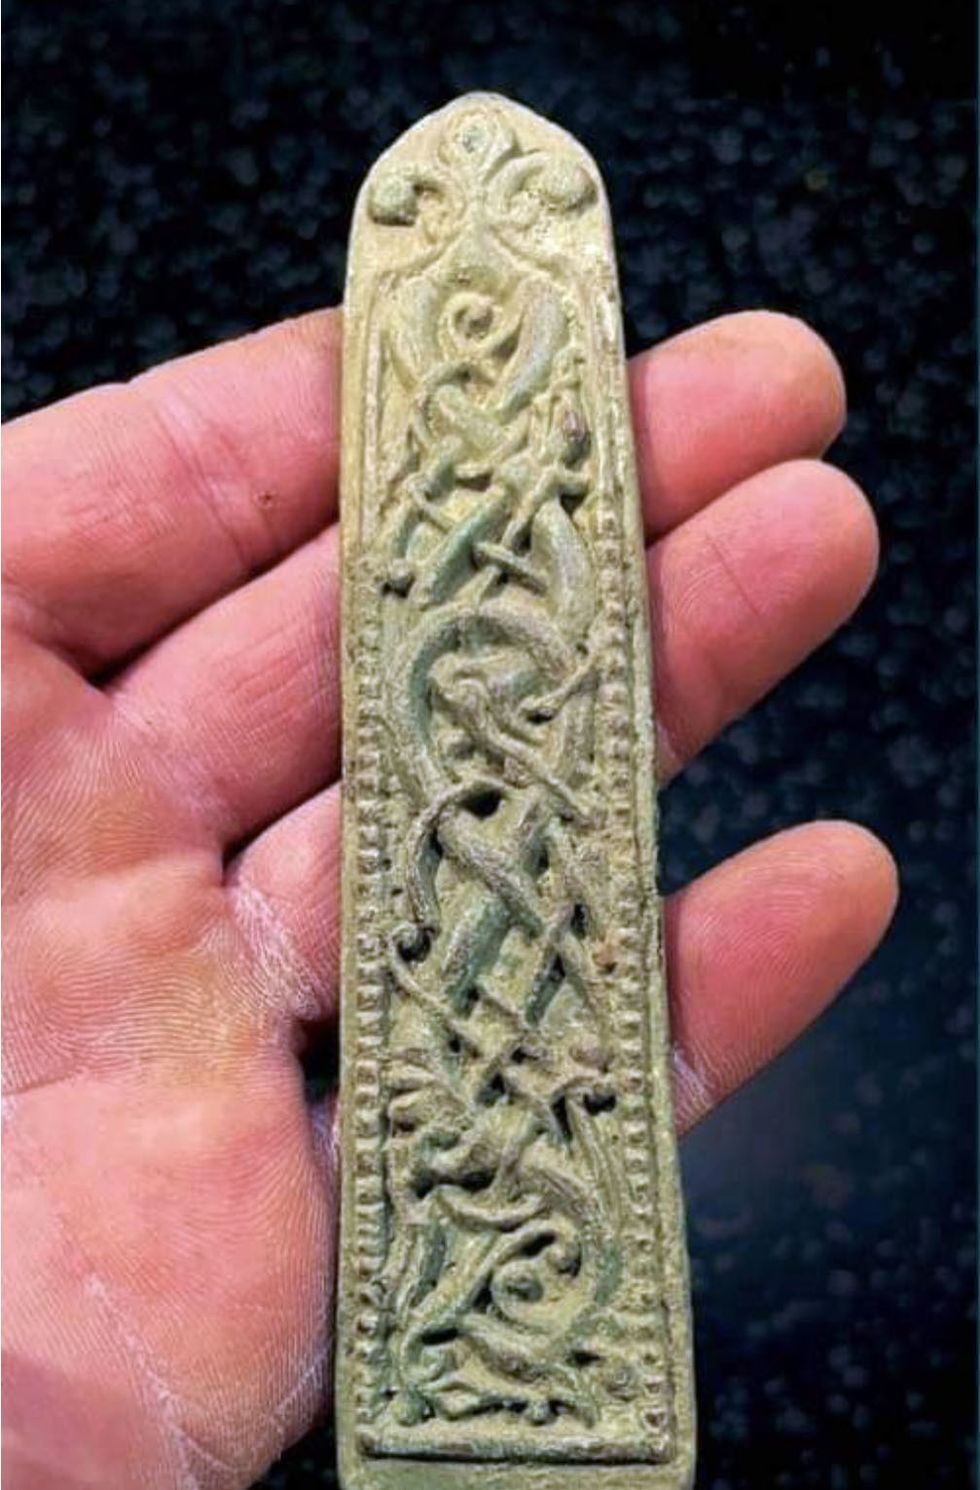 Viking artefact found by metal detectorist sells at auction for £15,000